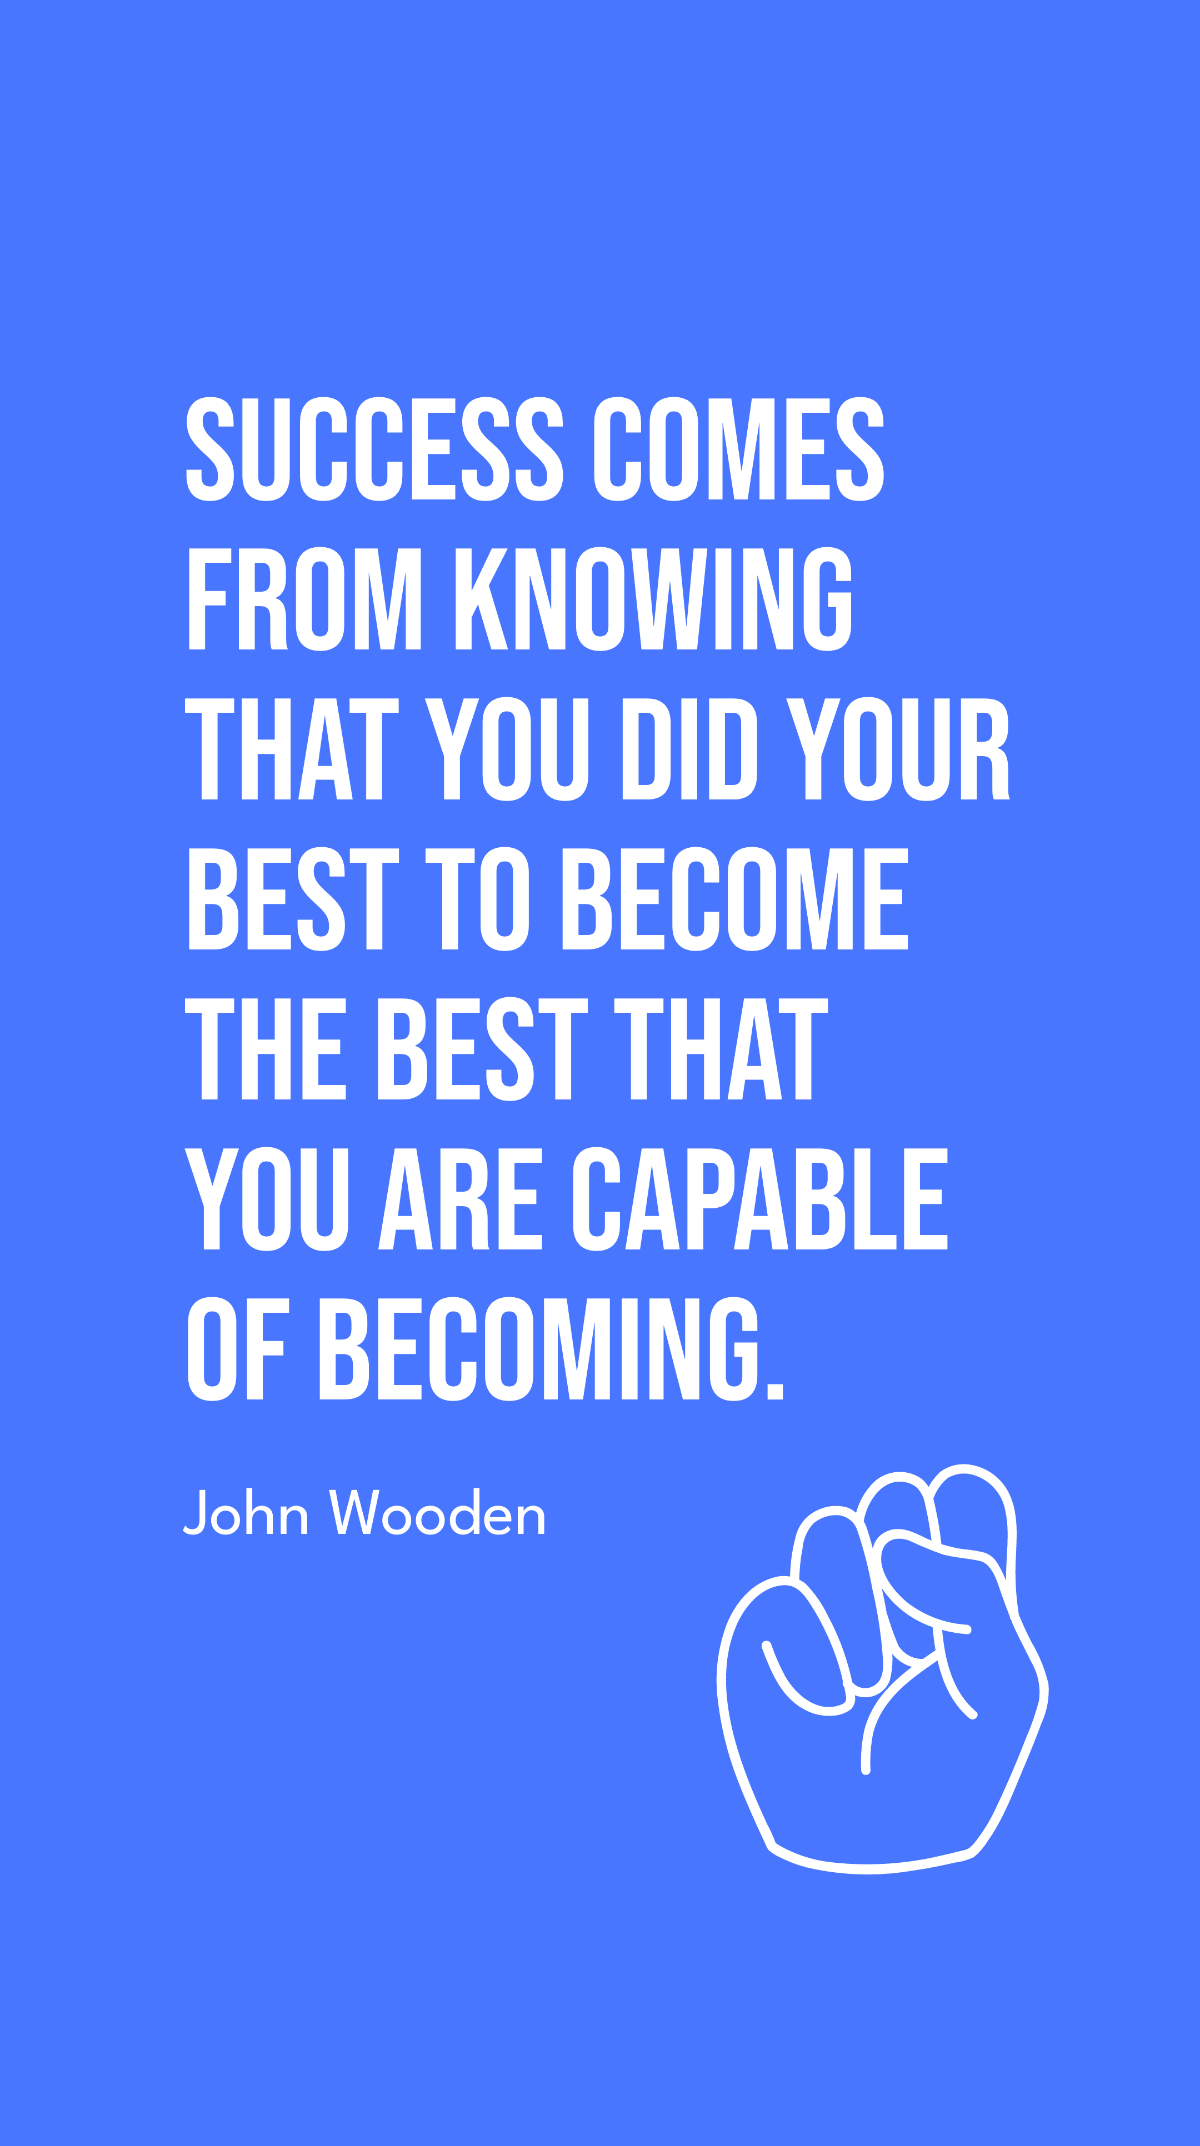 Free John Wooden - Success comes from knowing that you did your best to become the best that you are capable of becoming. Template